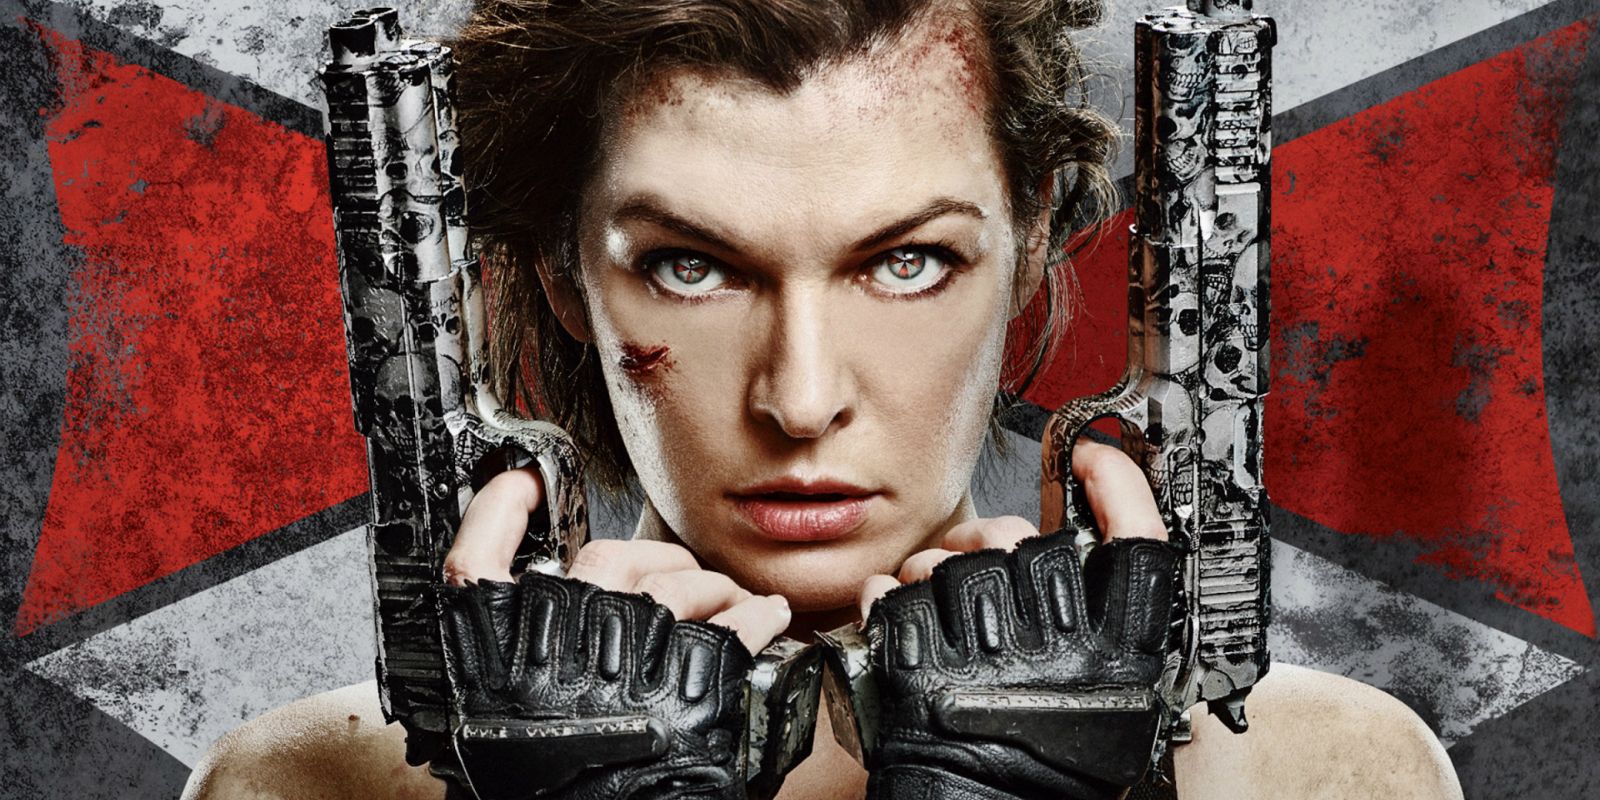 Resident Evil: The Final Chapter': The Self-Proclaimed Final